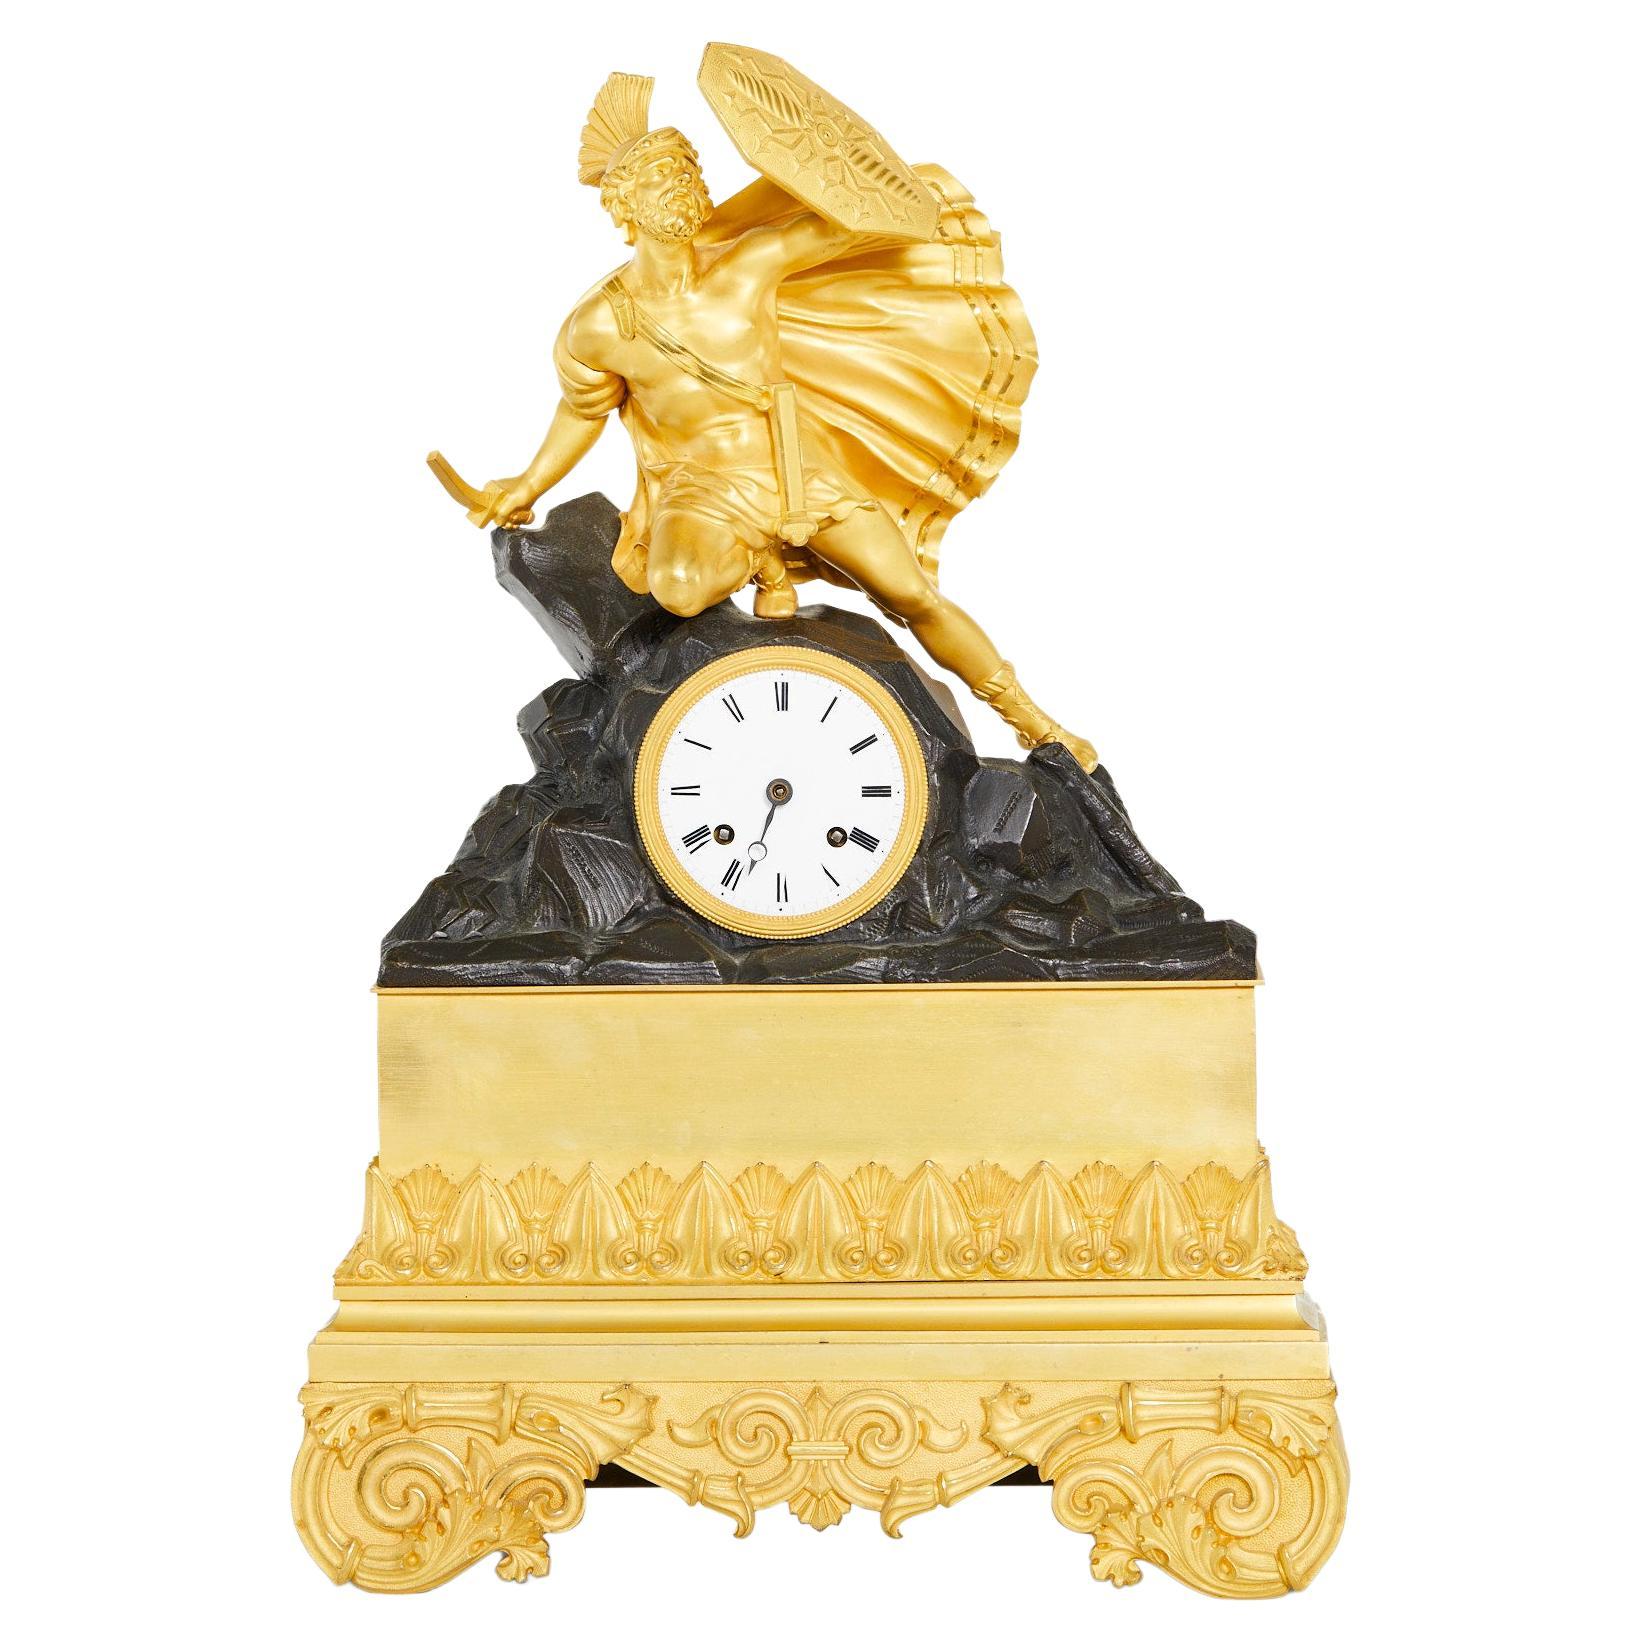 New Complete Set of Fancy Ansonia Statue Mantle Clock Feet 